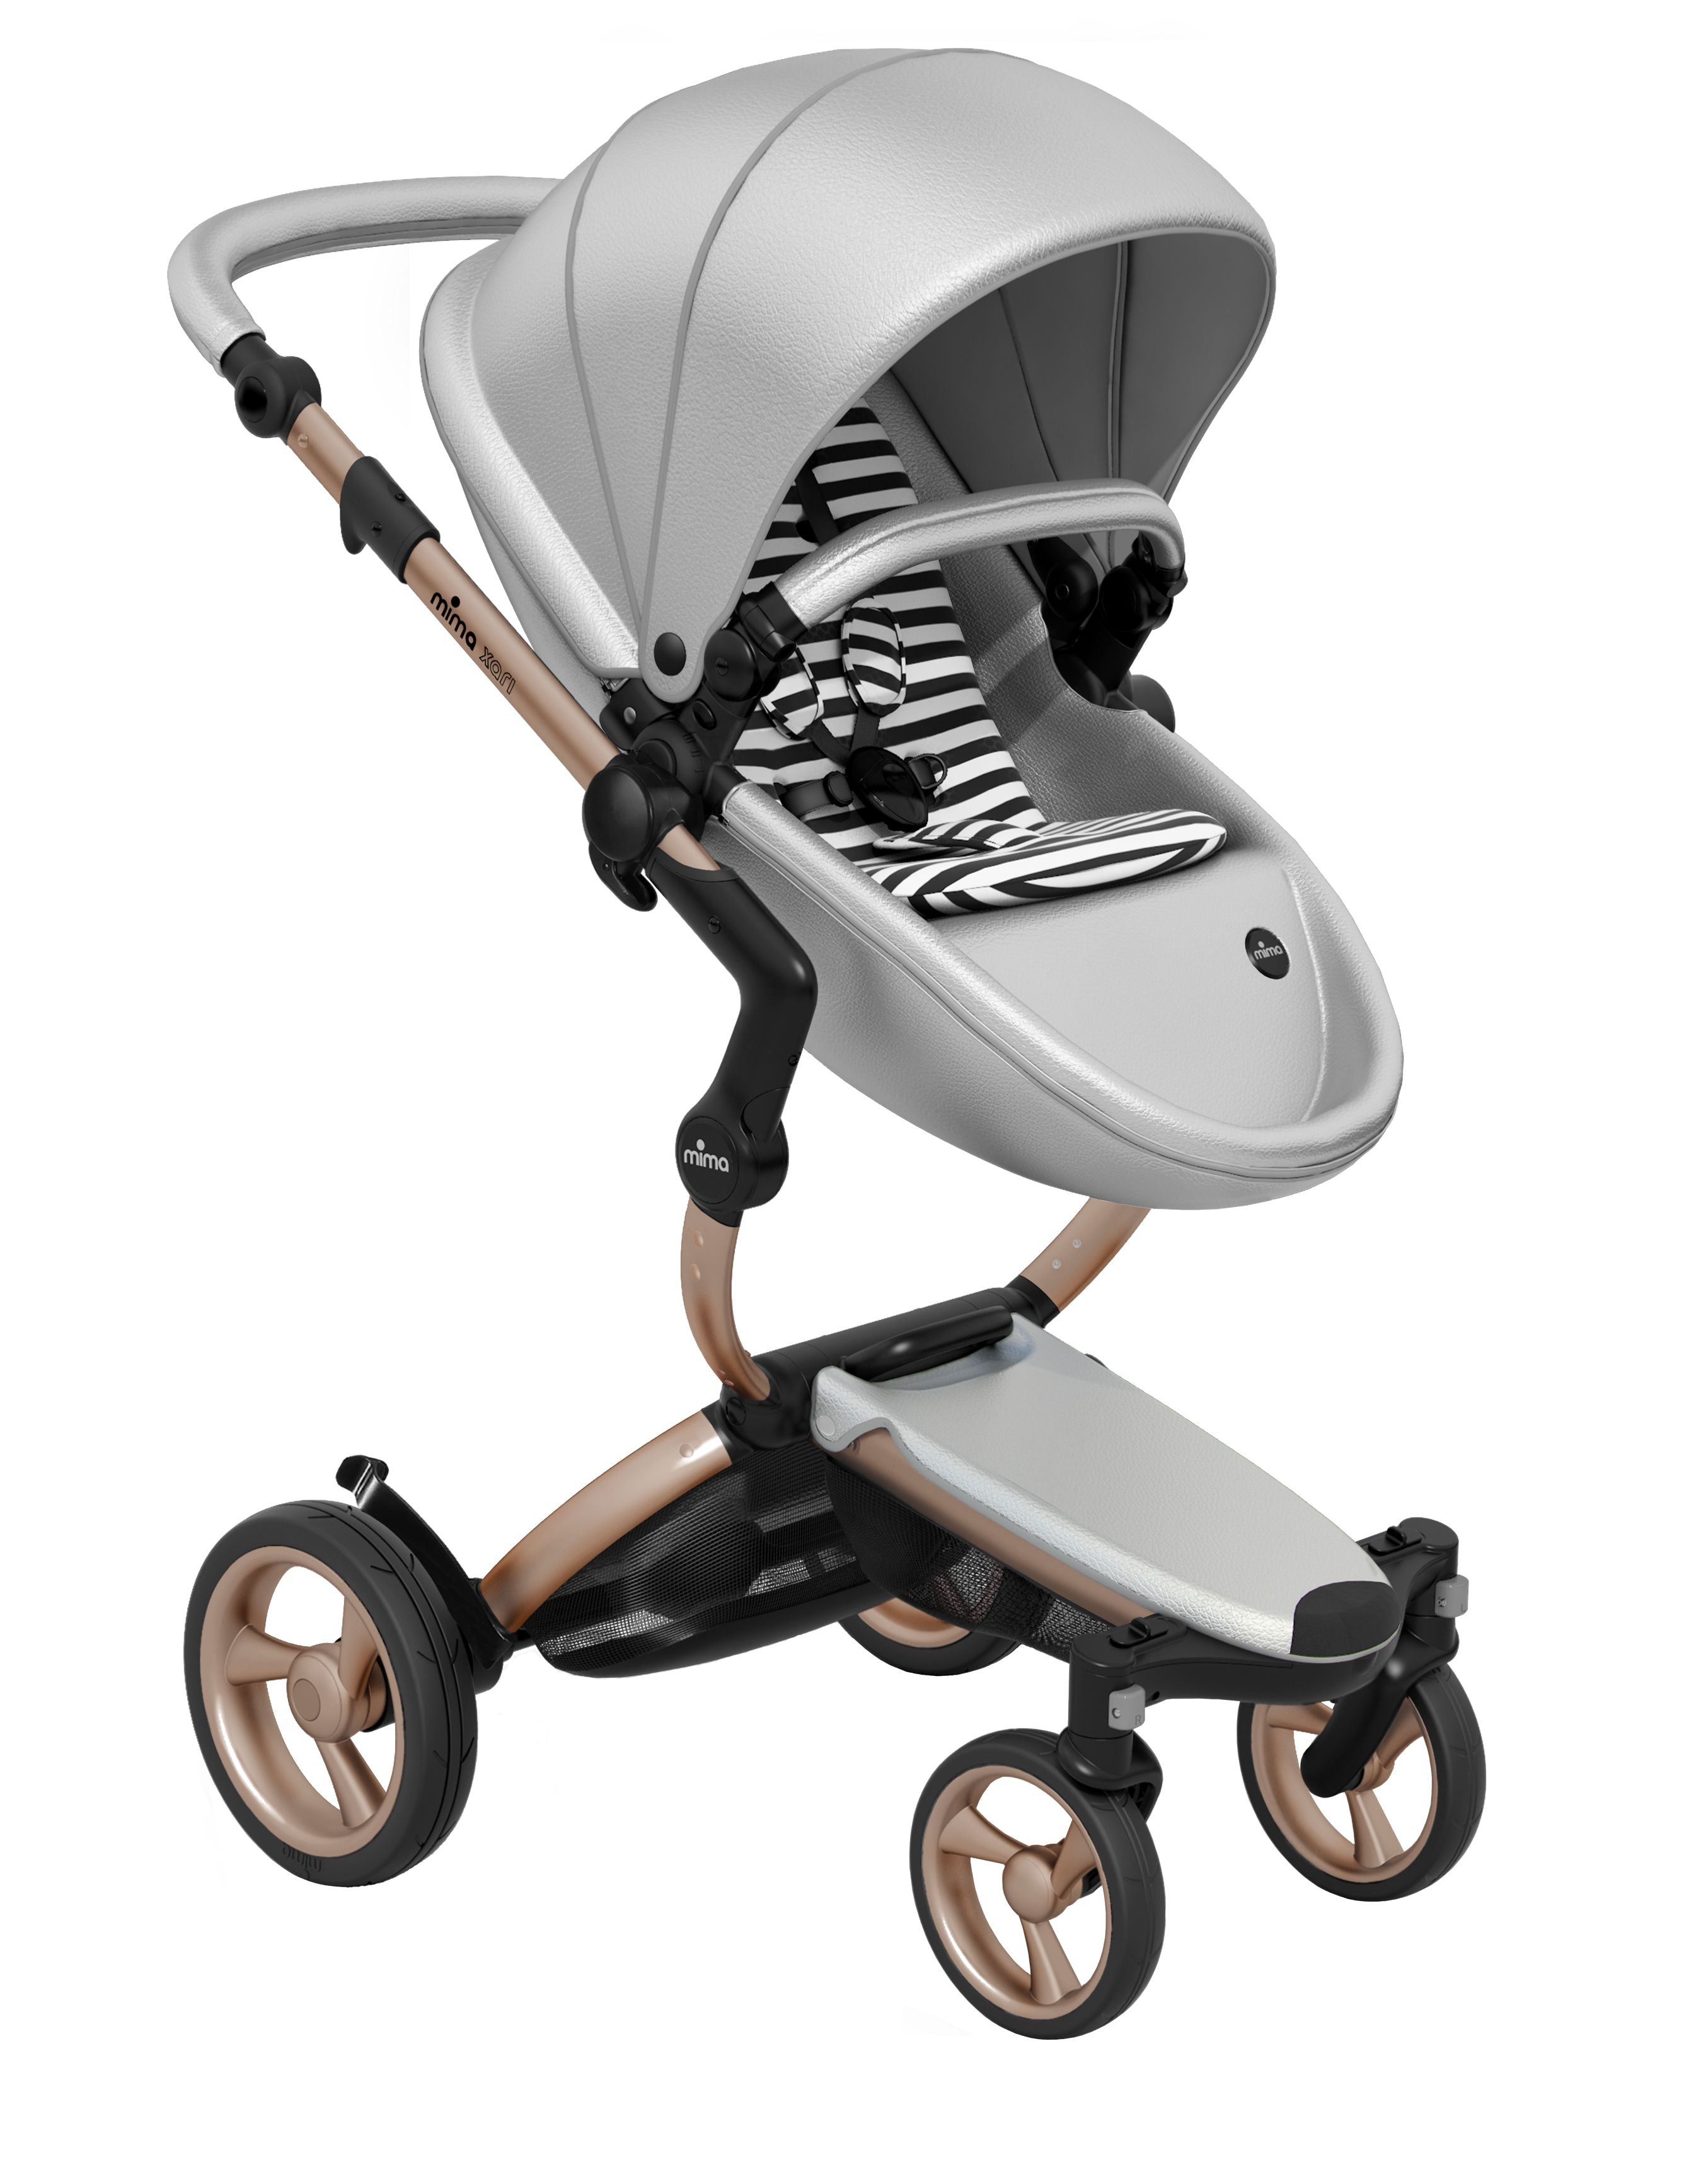 Mima Xari Pushchair - Argento + Rose Gold Chassis